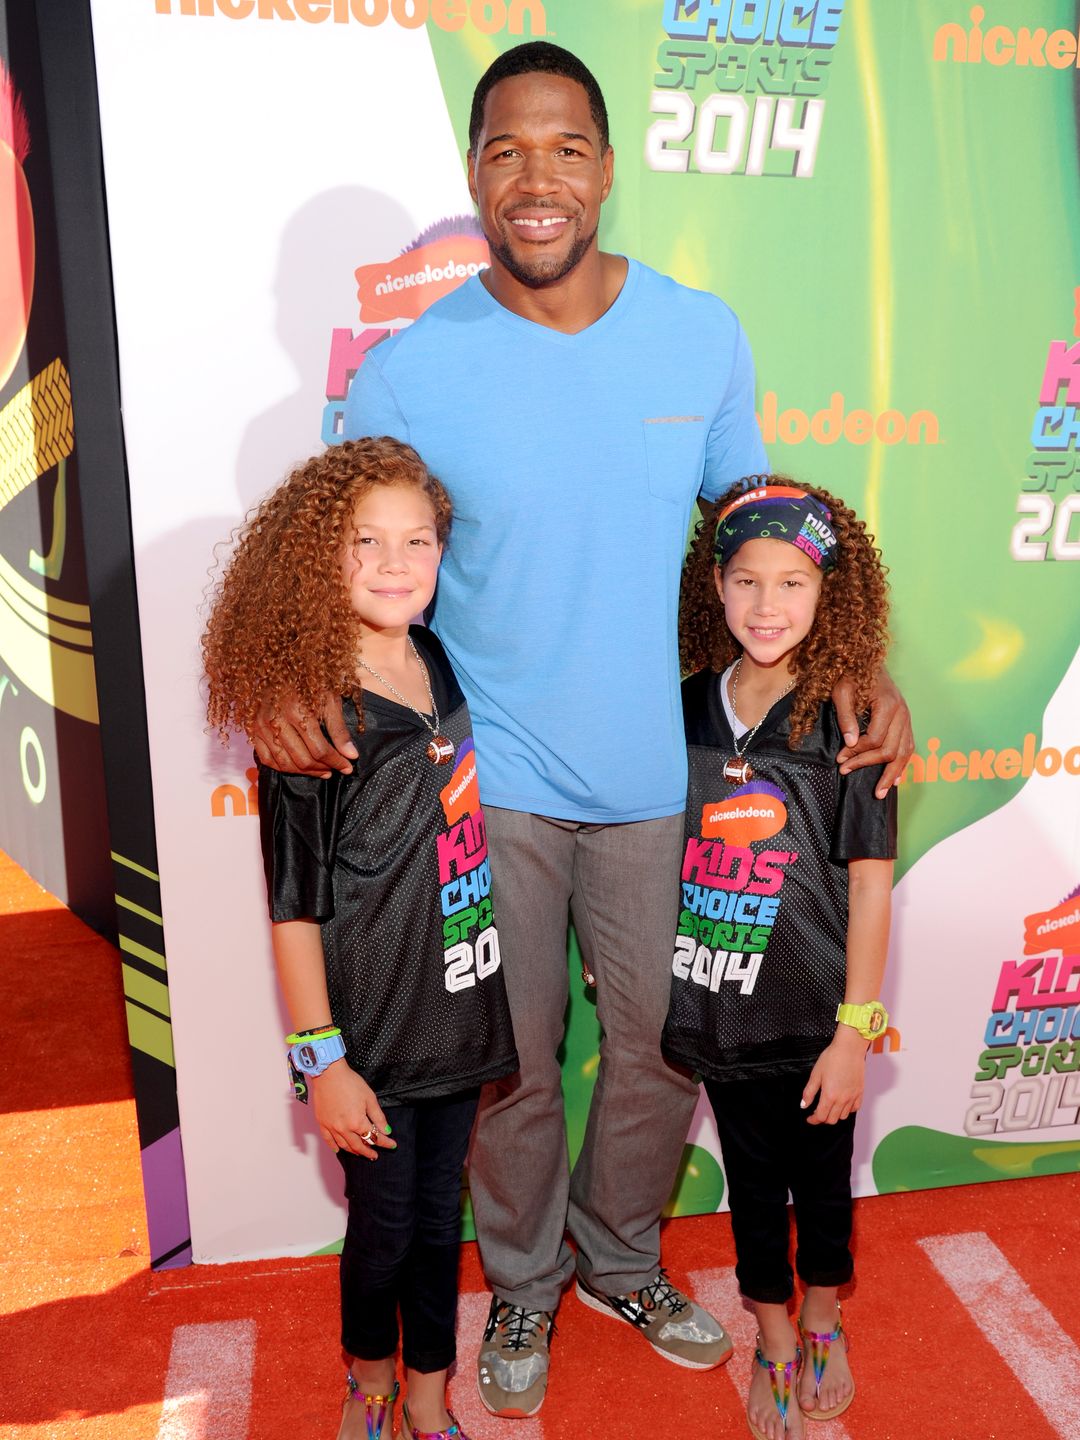 Michael Strahan is a proud dad to twins Isabella and Sophia